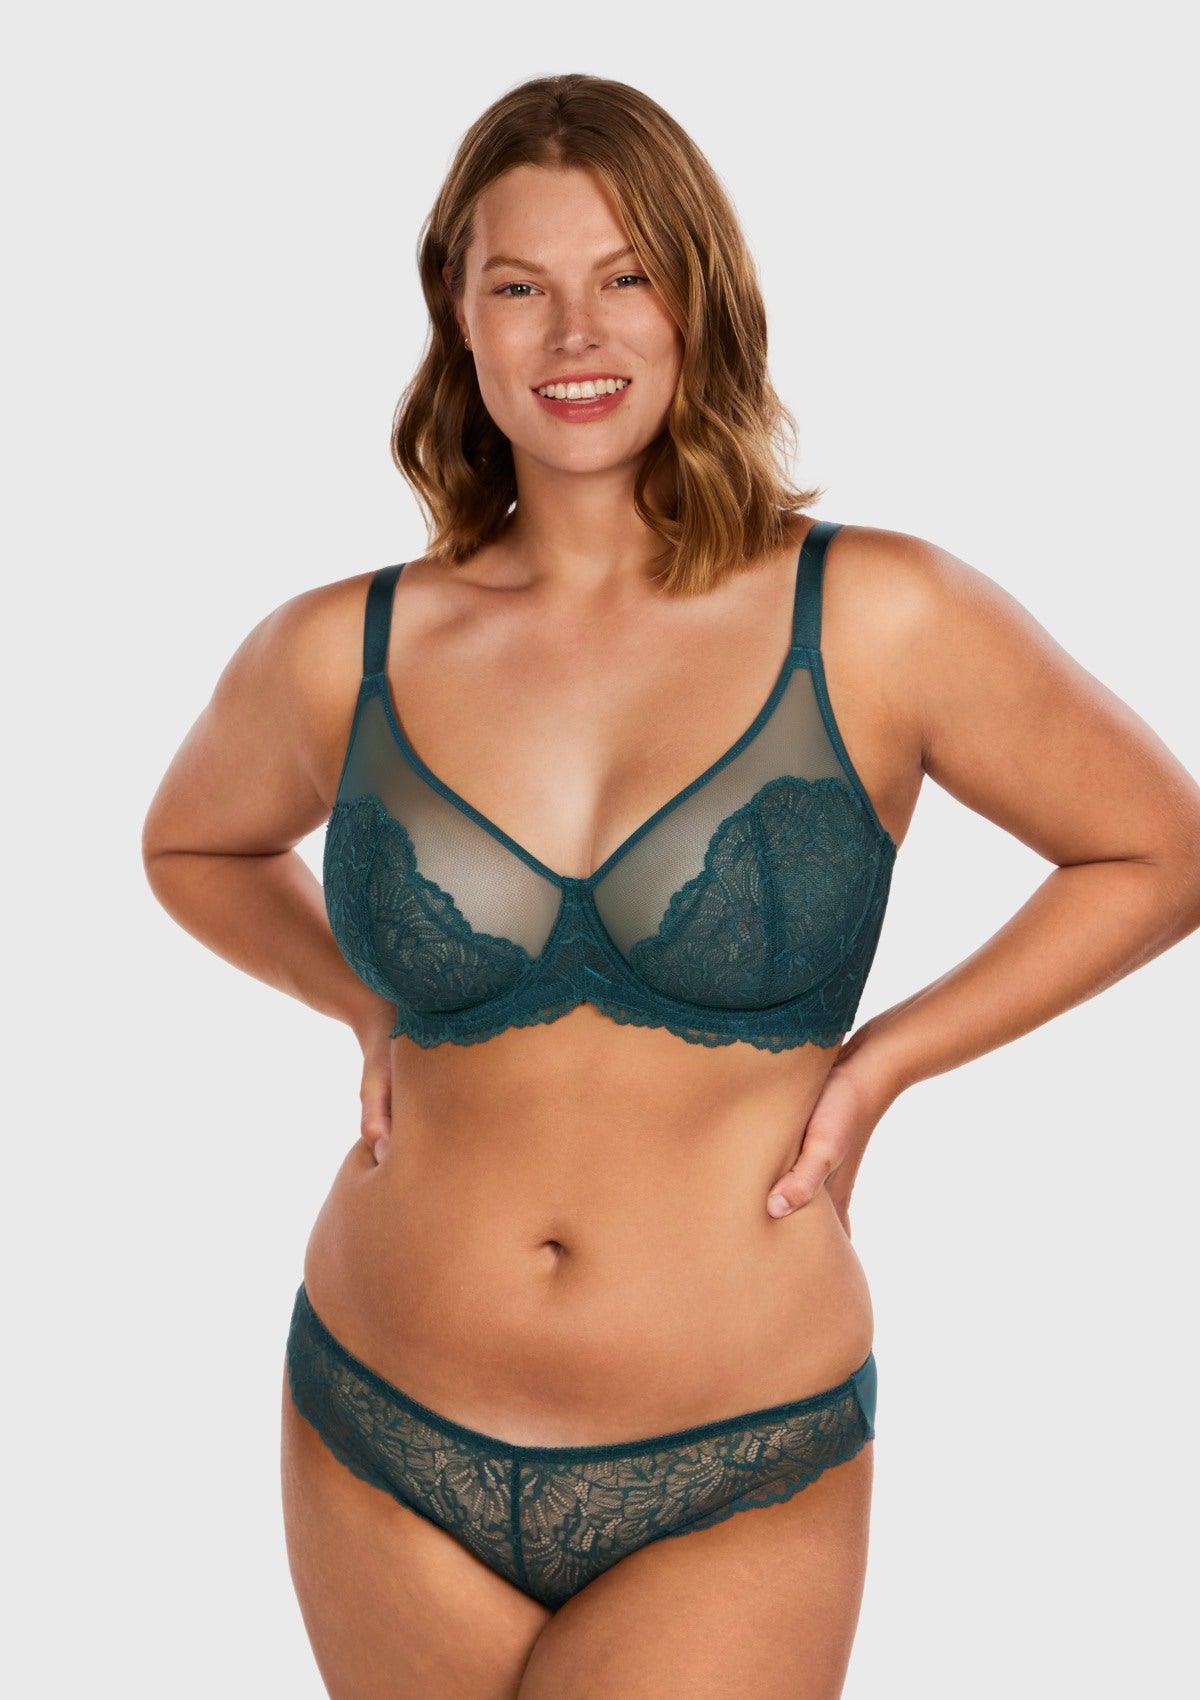 HSIA Blossom Full Figure See-Through Lace Bra For Side And Back Fat - Balsam Blue / 38 / C